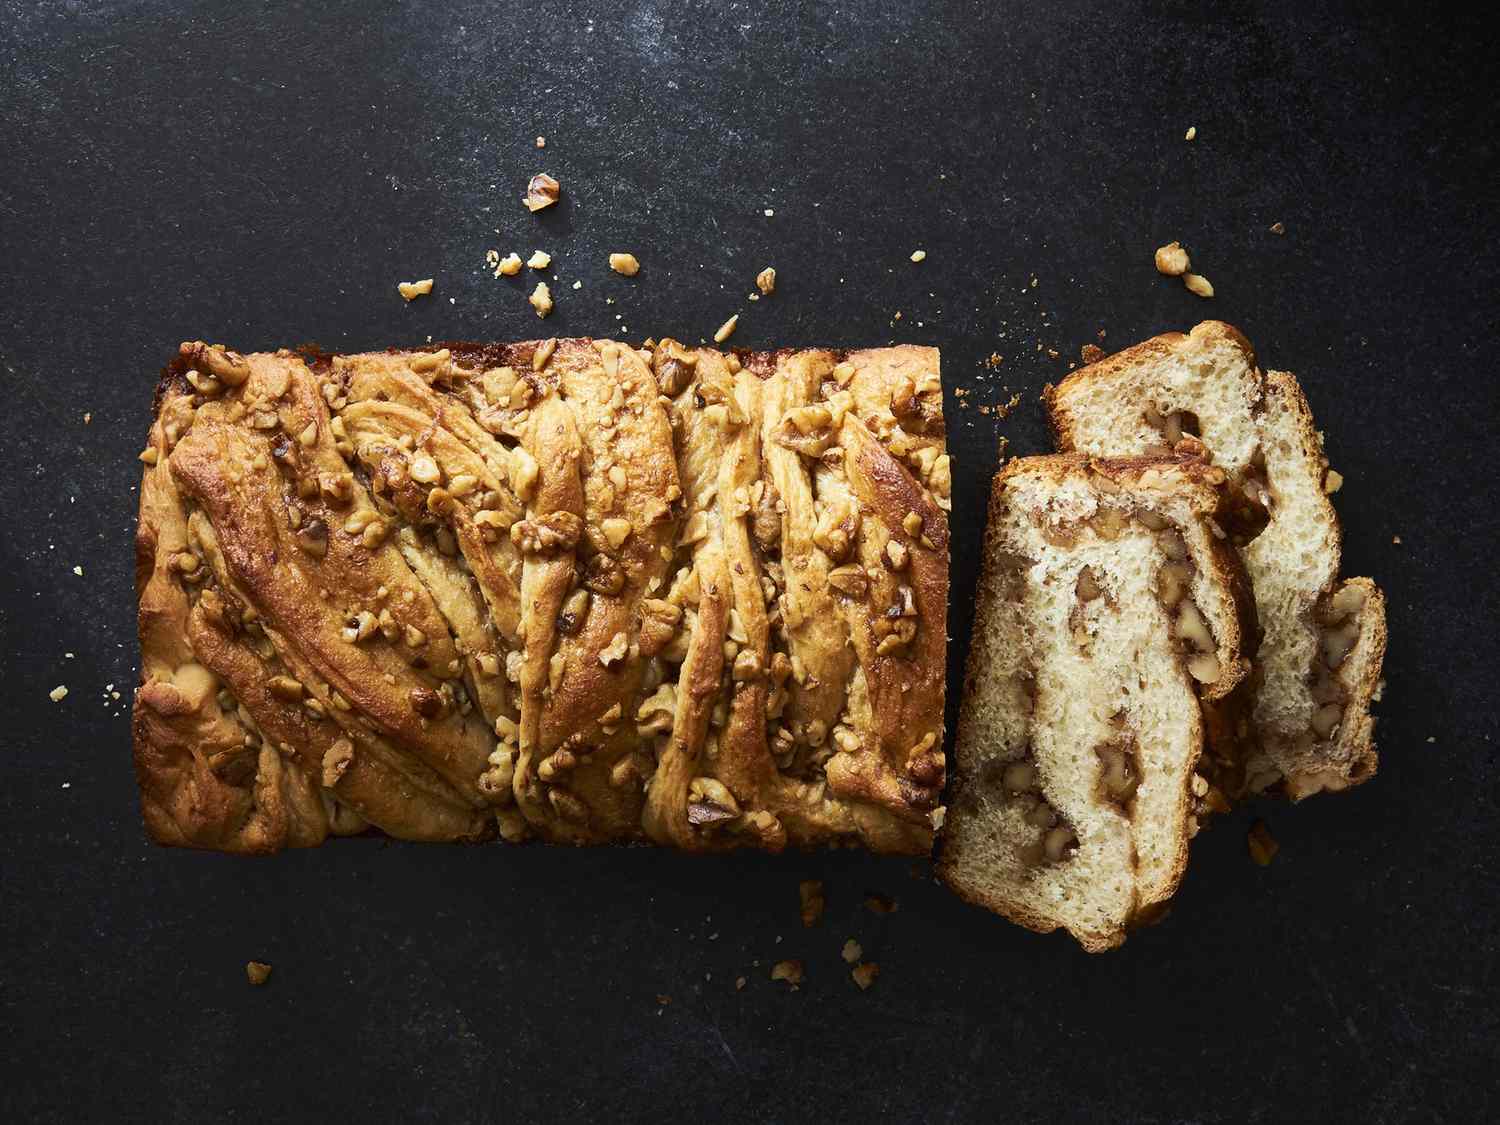 close up view of a sliced Babka with nuts on a black surface